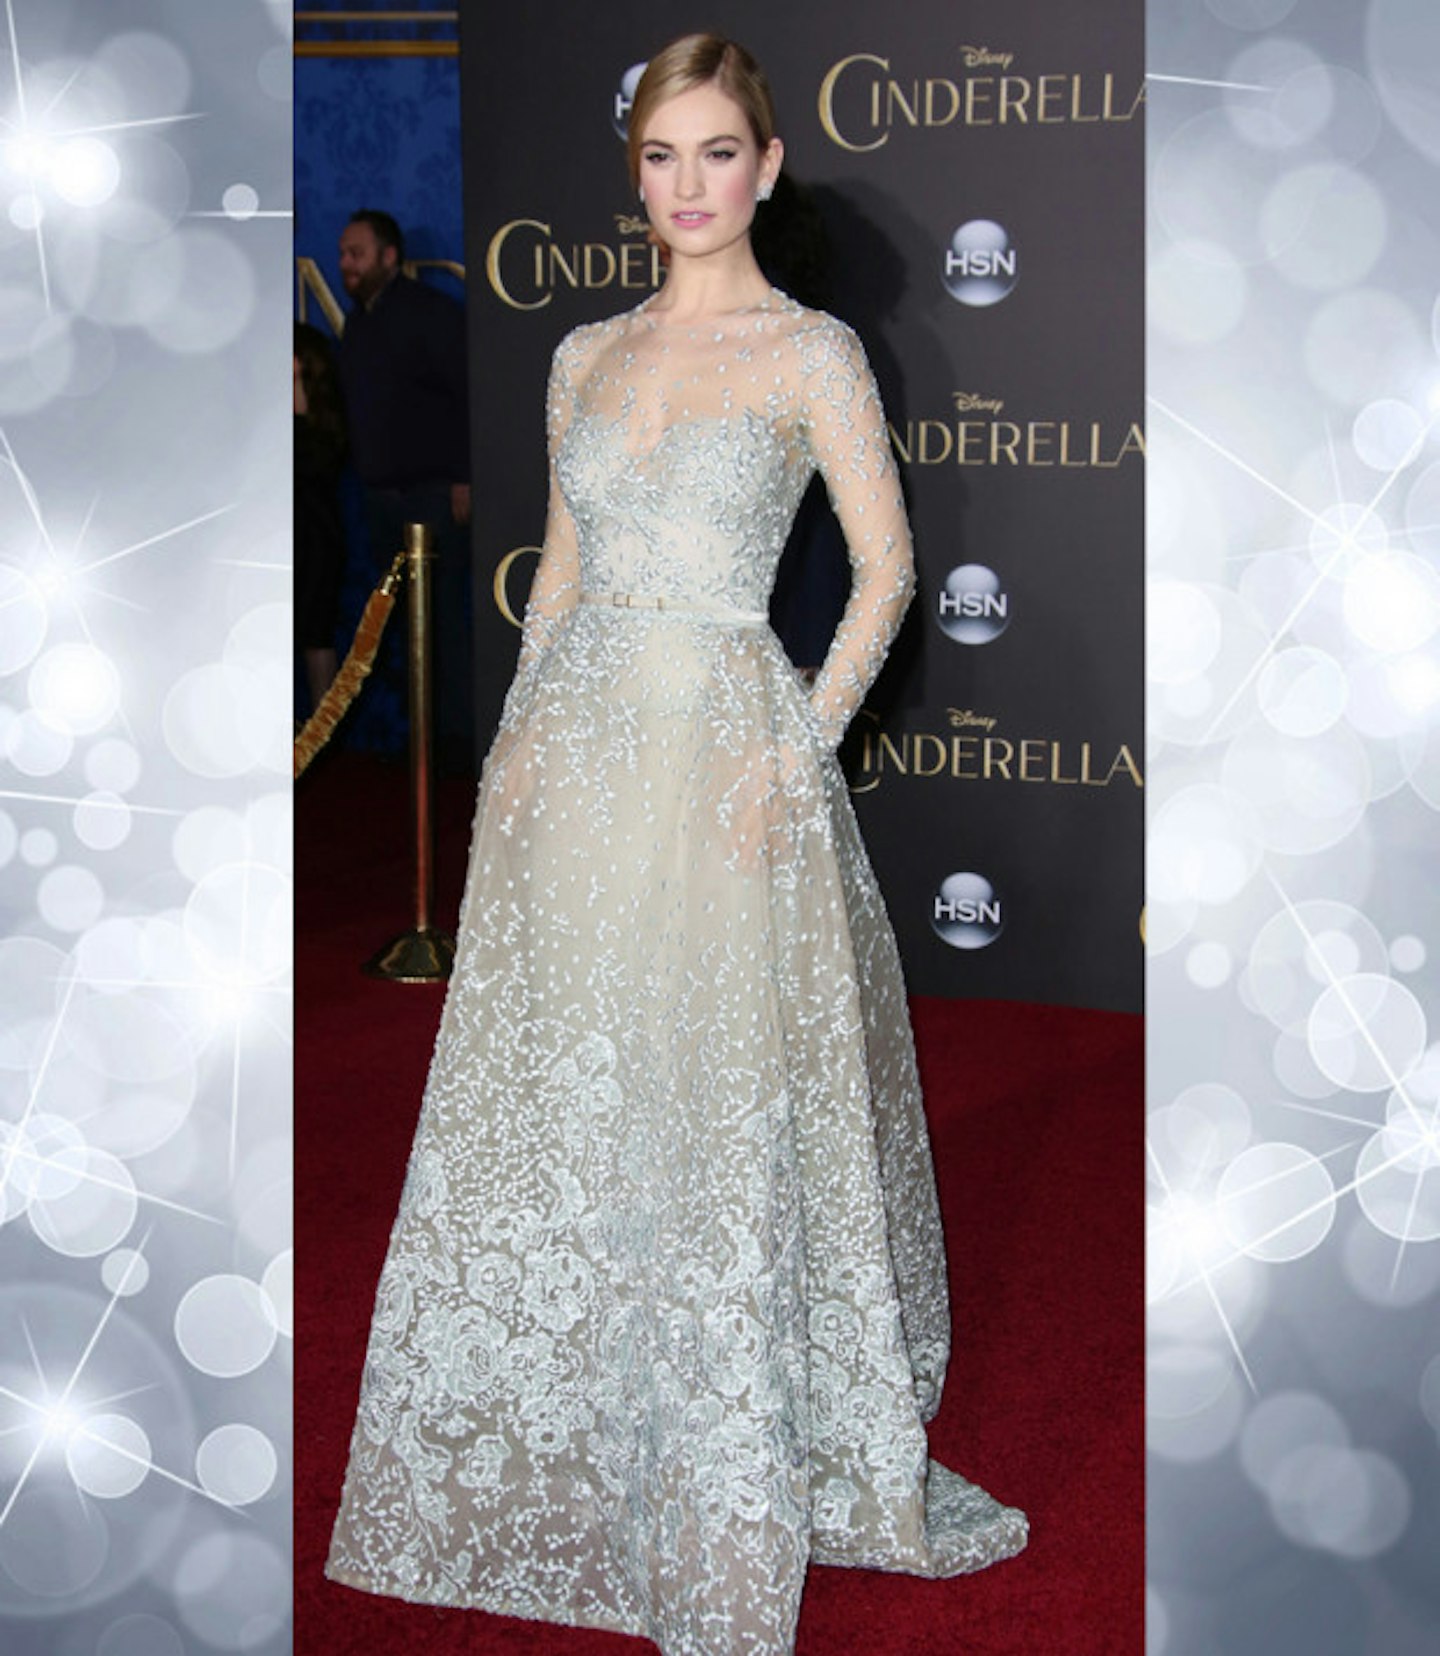 Cinderella filmgoers hit out over Lily James's tiny waist